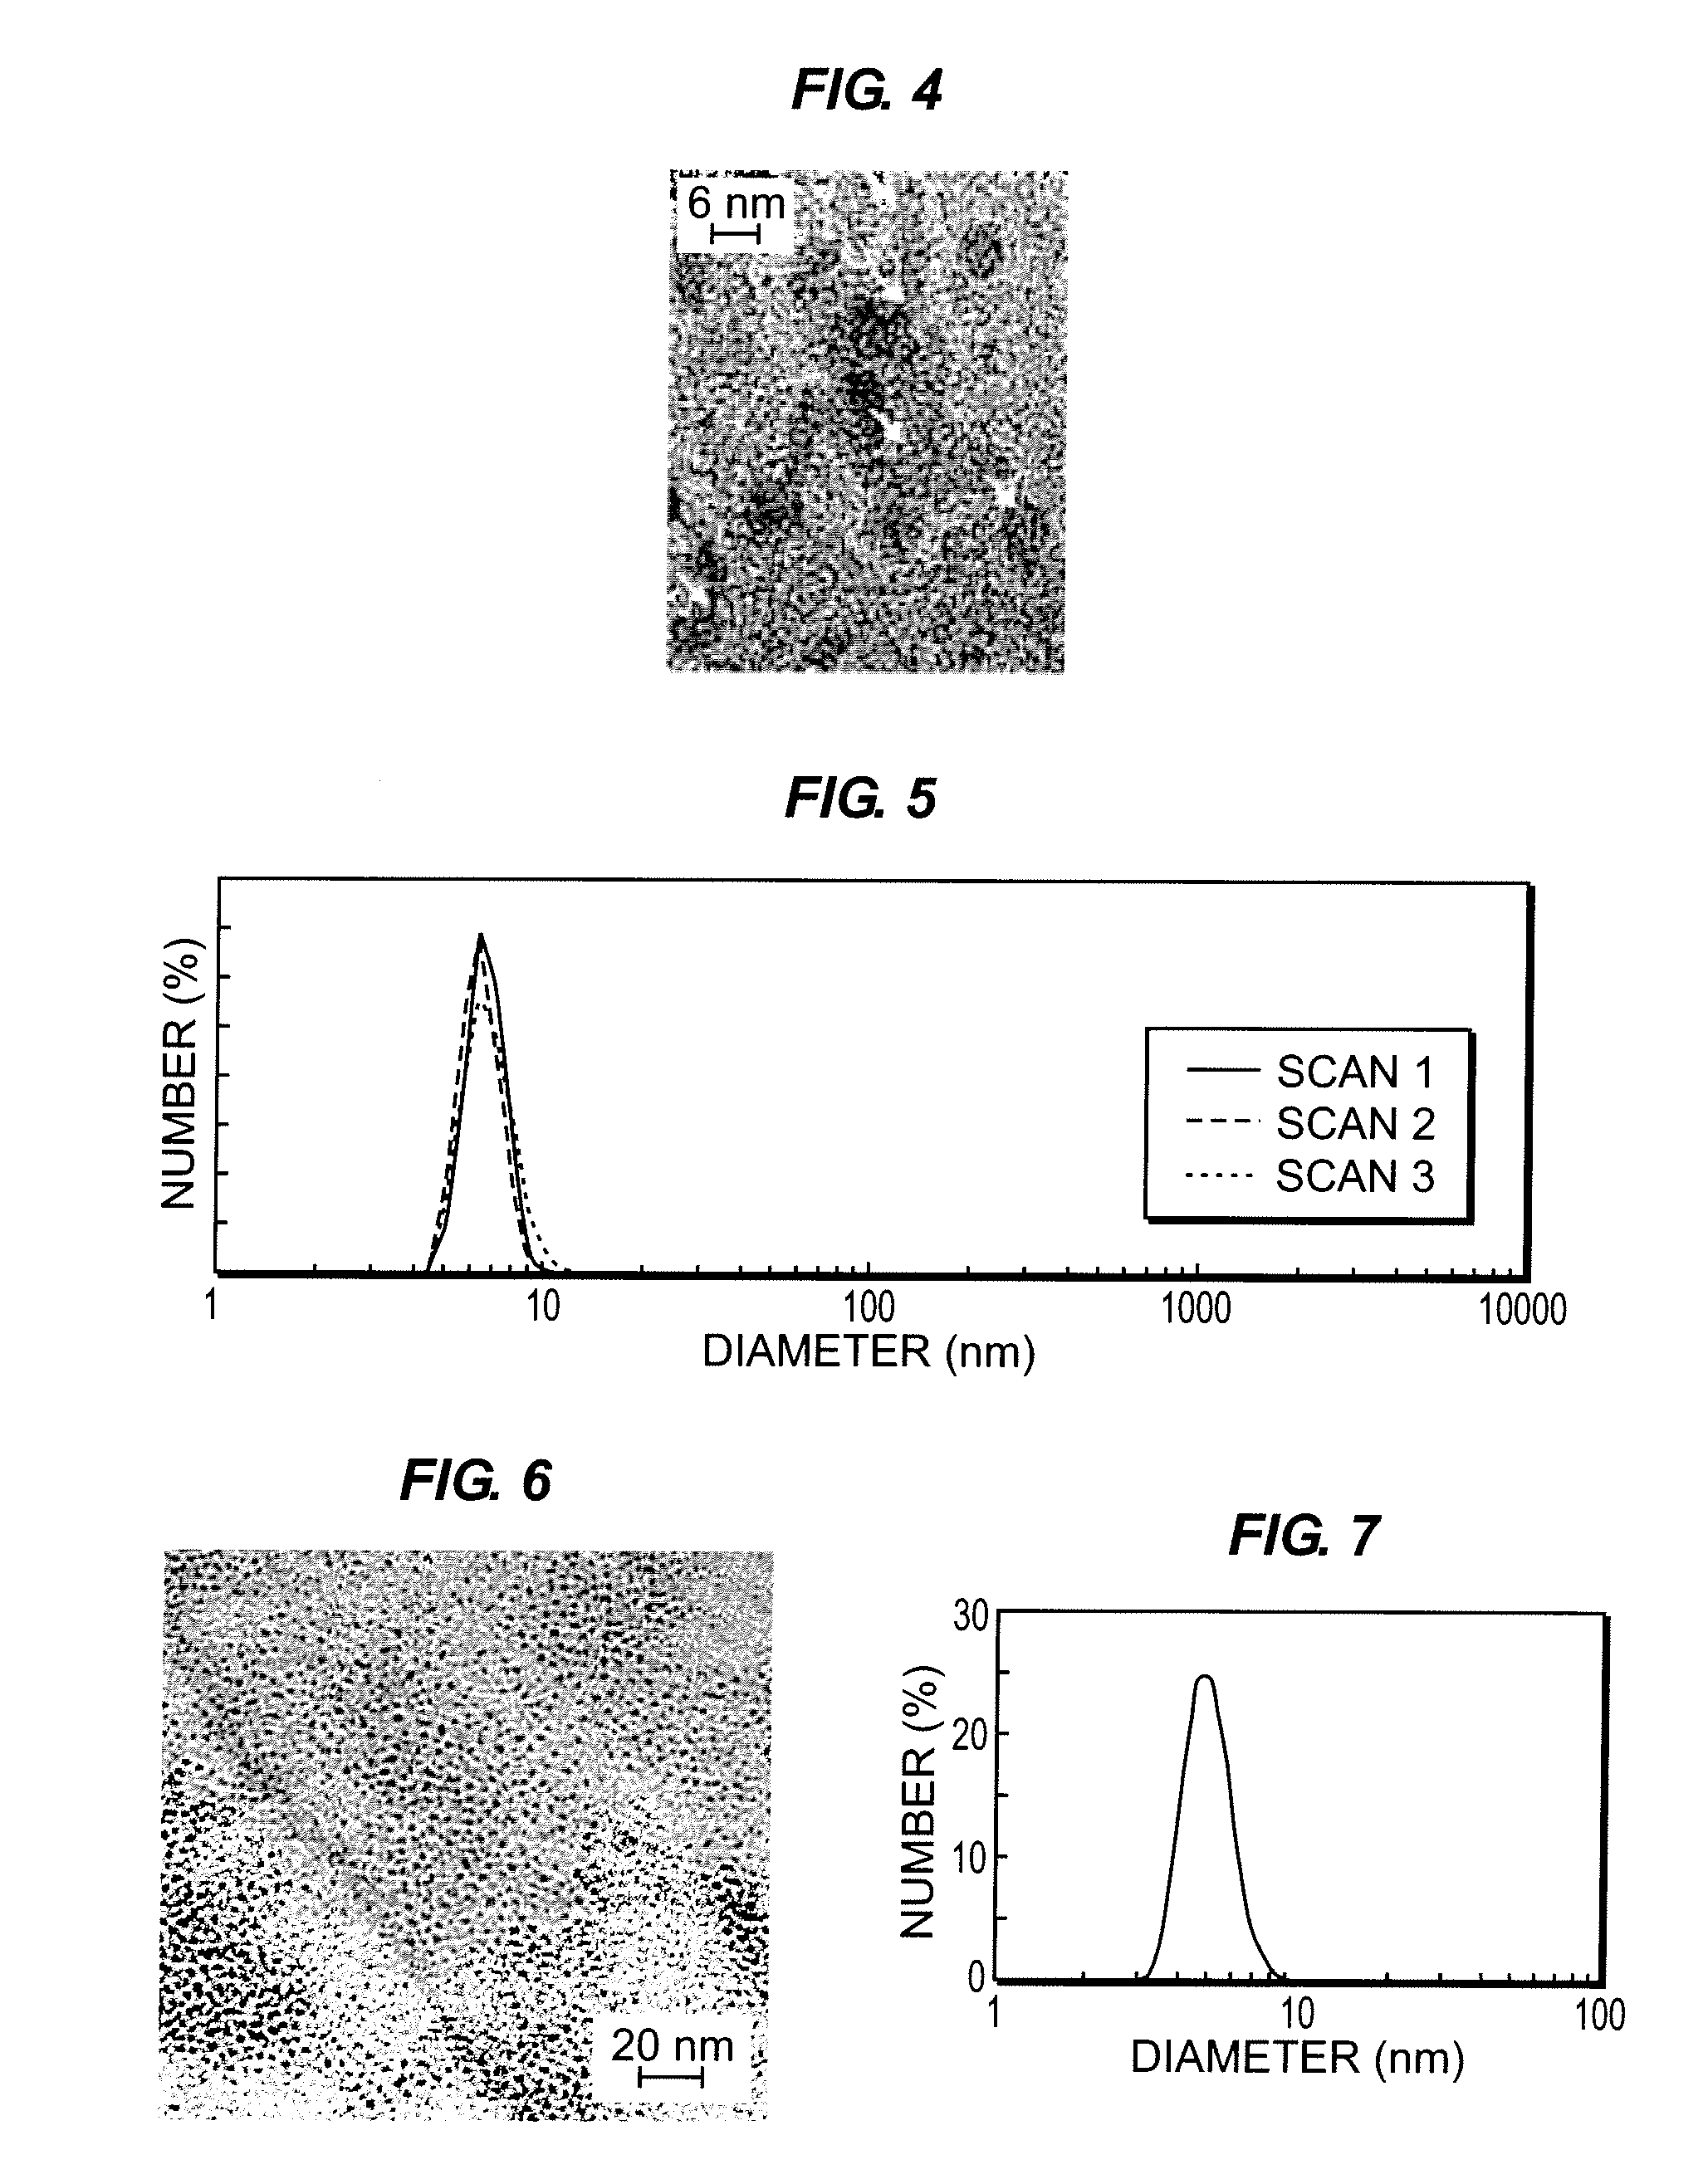 Nanoparticle-based imaging agents for x-ray/computed tomography and methods for making same